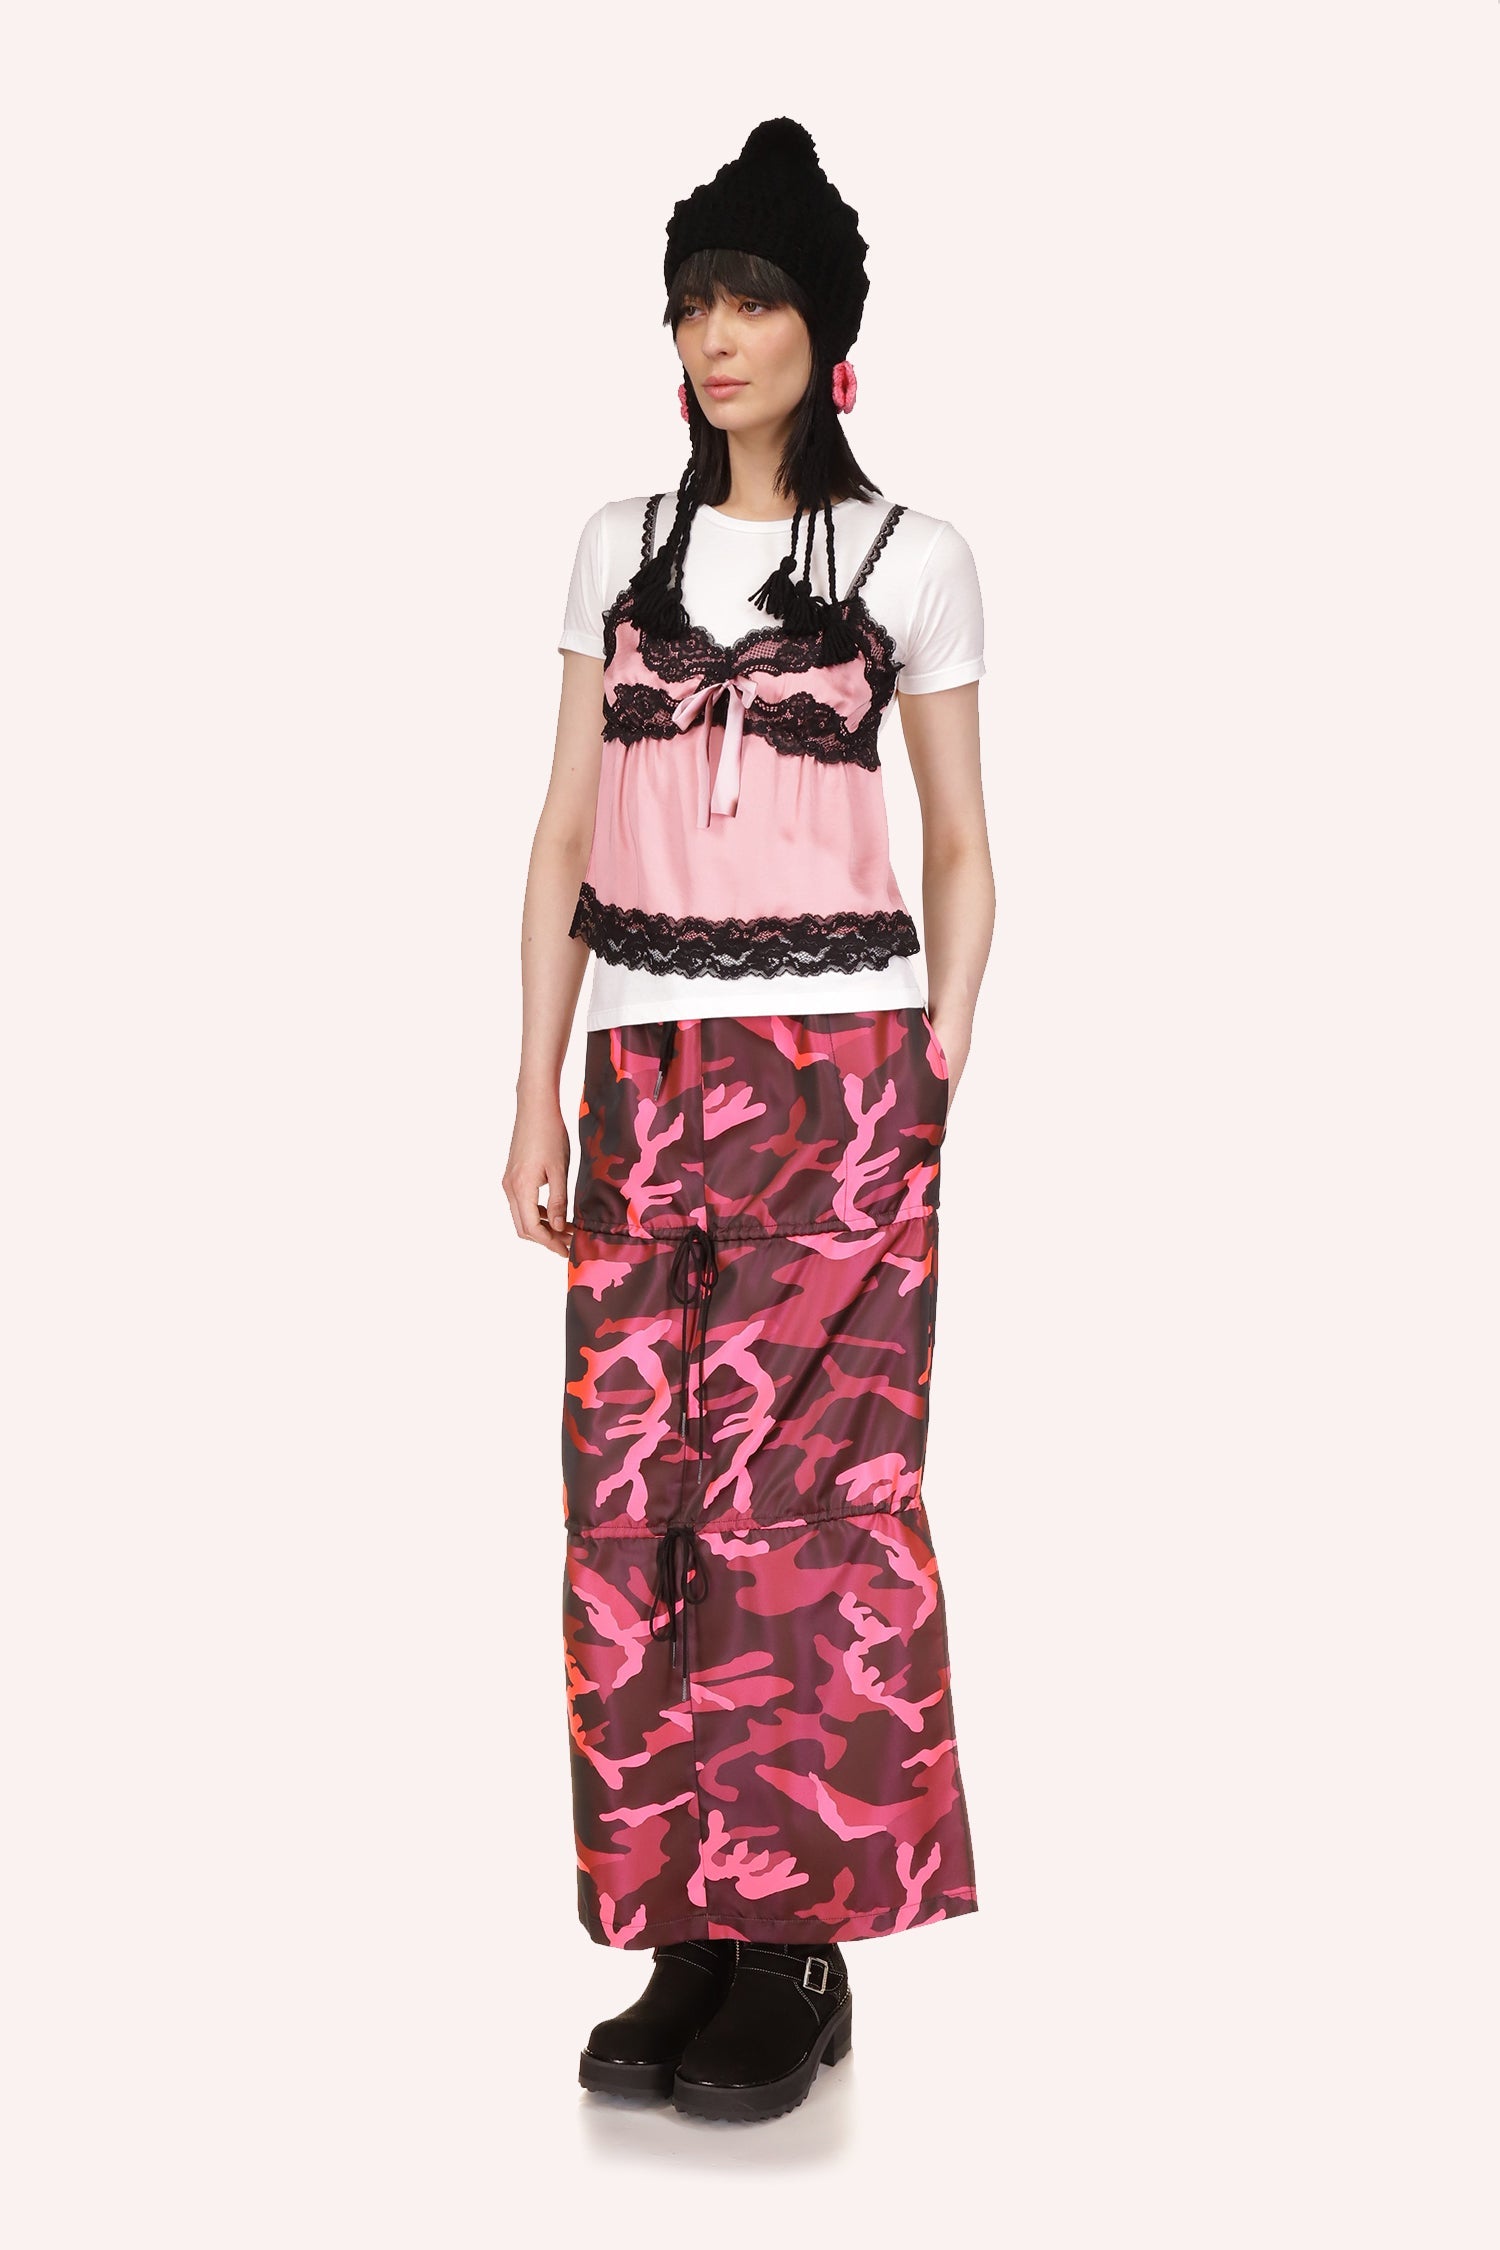 Camouflage skirt, dark pink, pink, light pink top to the bottom, 3 levels, side pocket, 2-laces to adjust